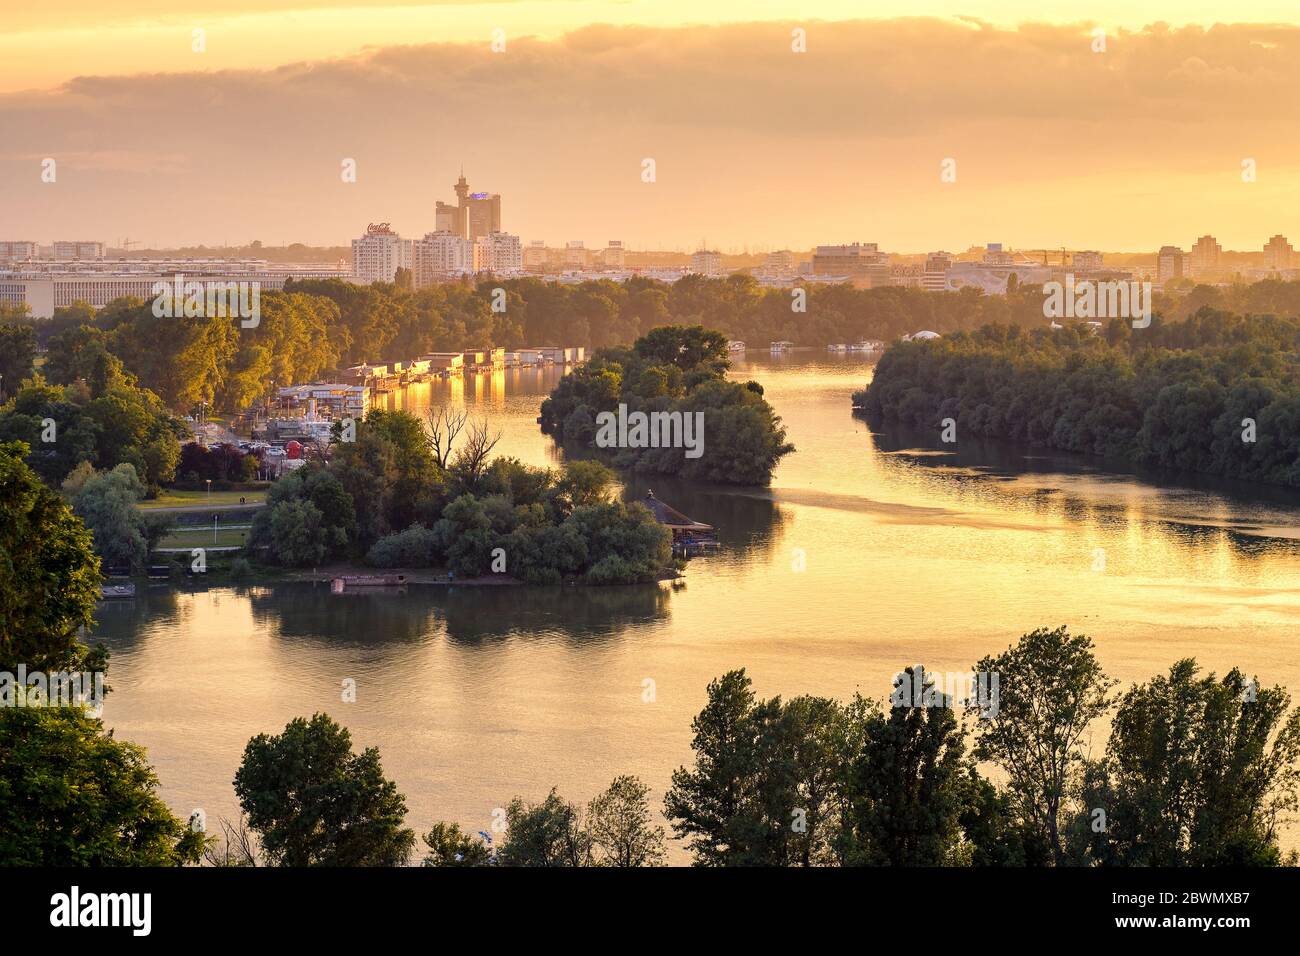 Belgrade / Serbia - May 30, 2020: Belgrade cityscape and confluence of rivers Danube and Sava at golden hour sunset, view from Belgrade Fortress Kalem Stock Photo